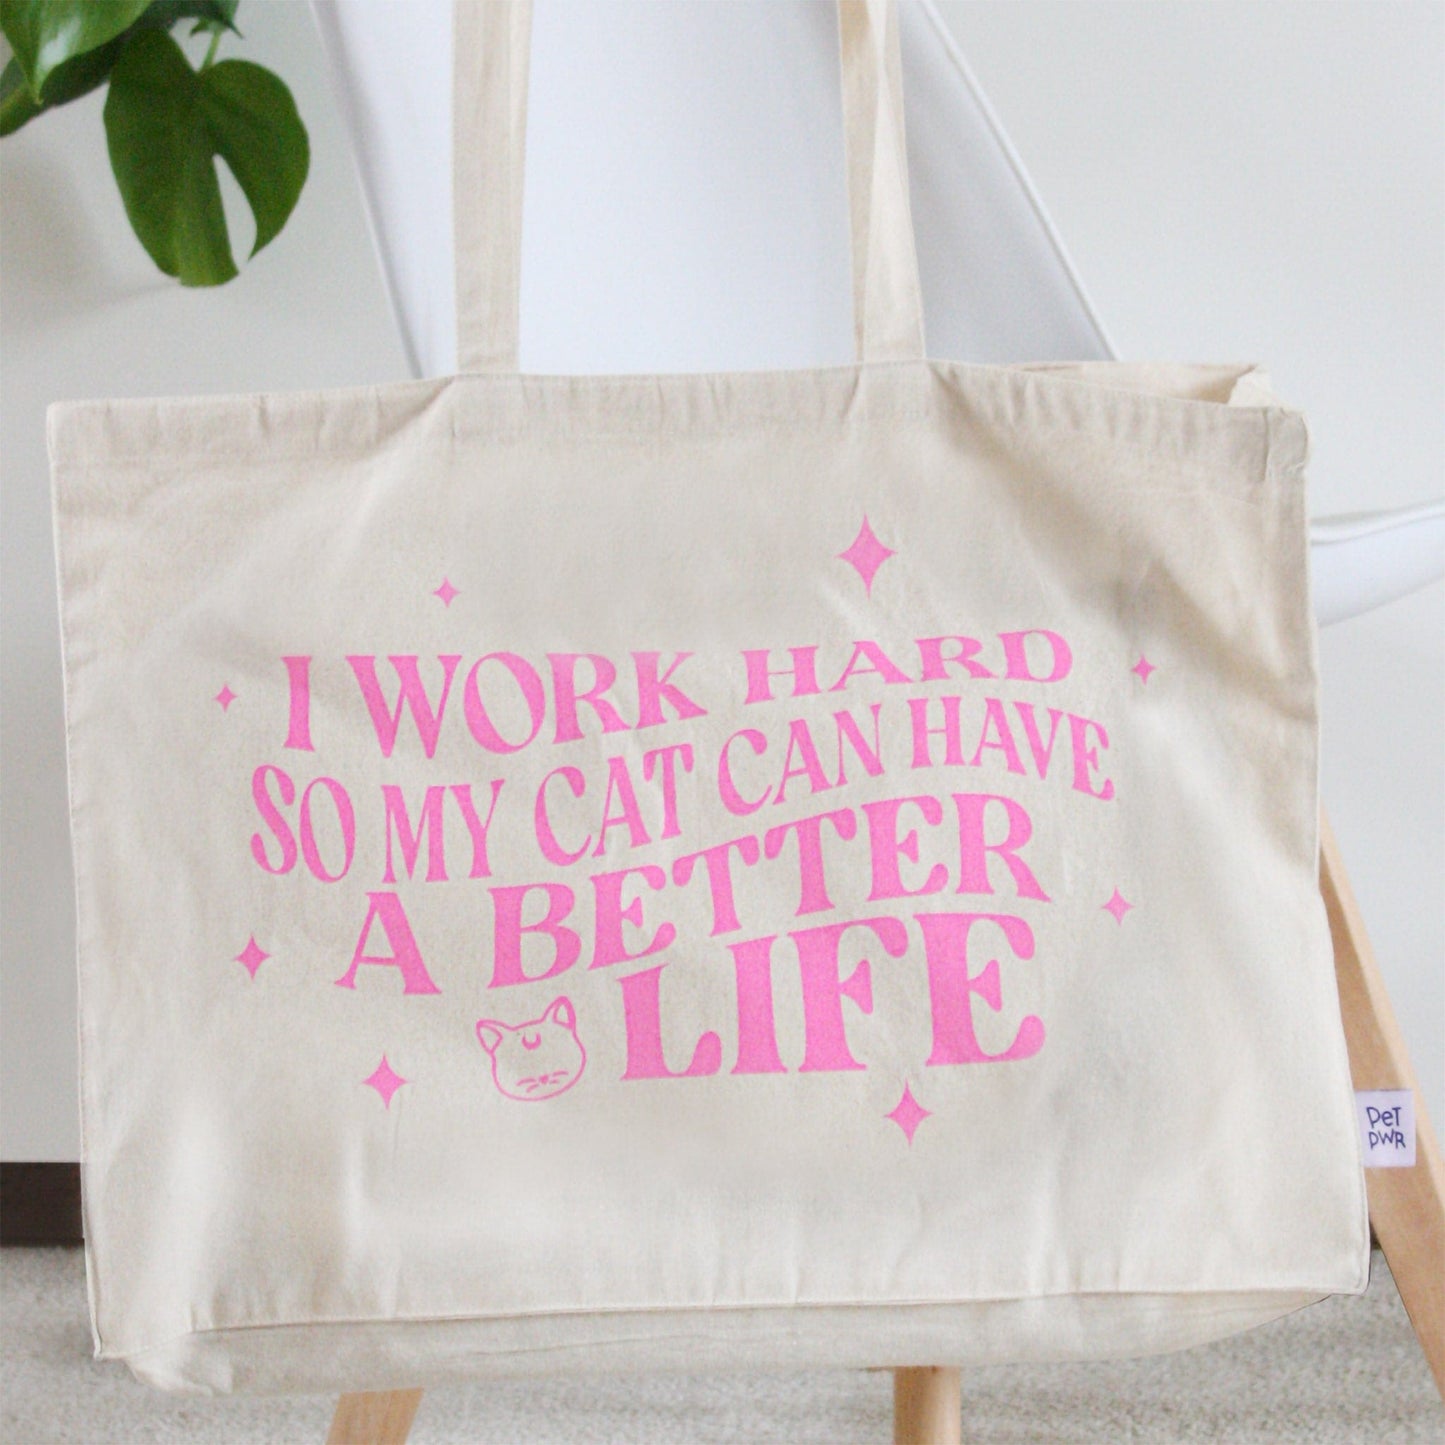 Maxi bag" I work hard so my cat can have a better life" 🐈 02